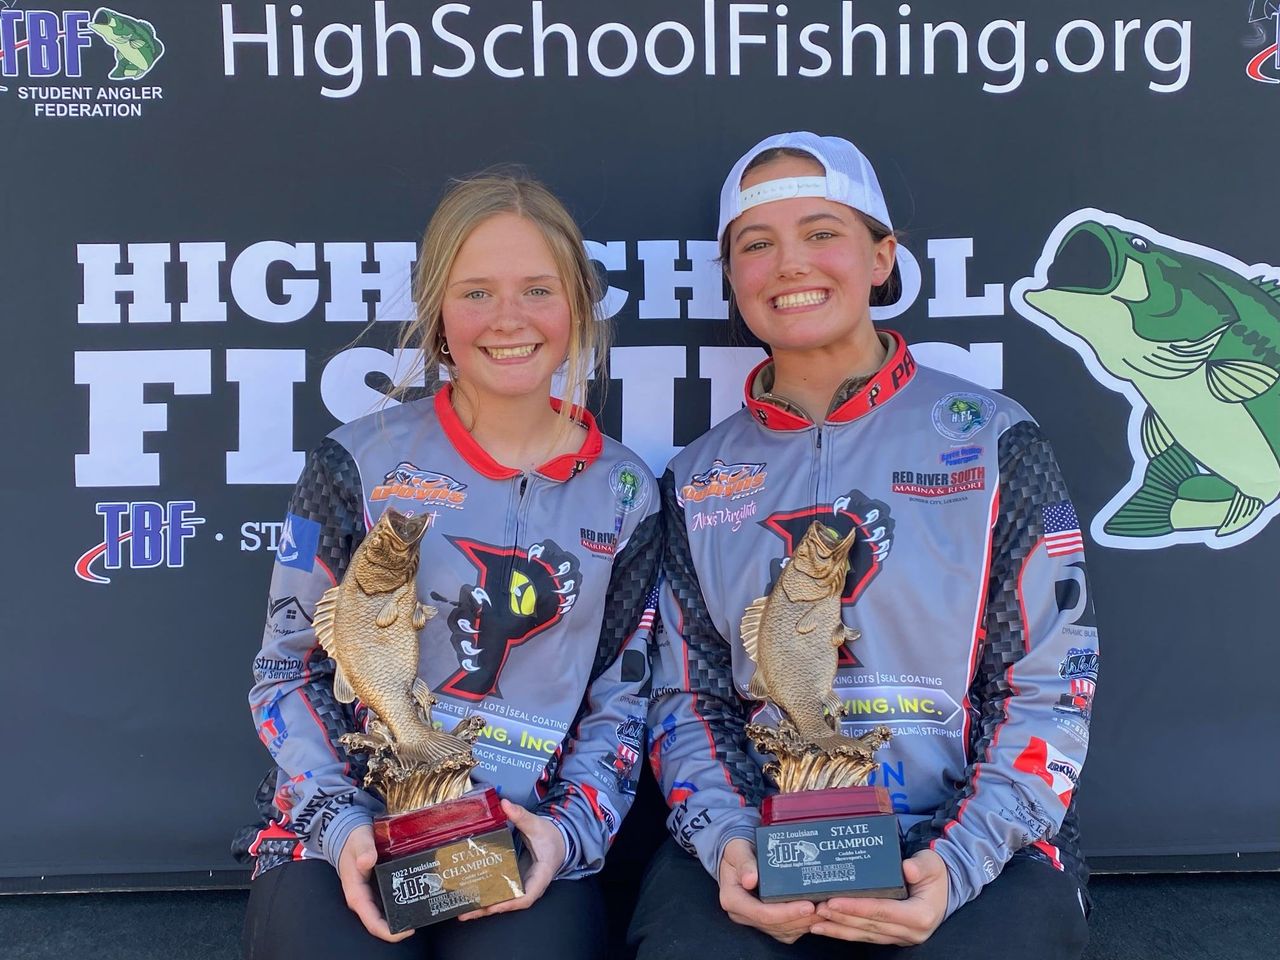 Two Louisiana teens became the first girls to win a state high school state title.